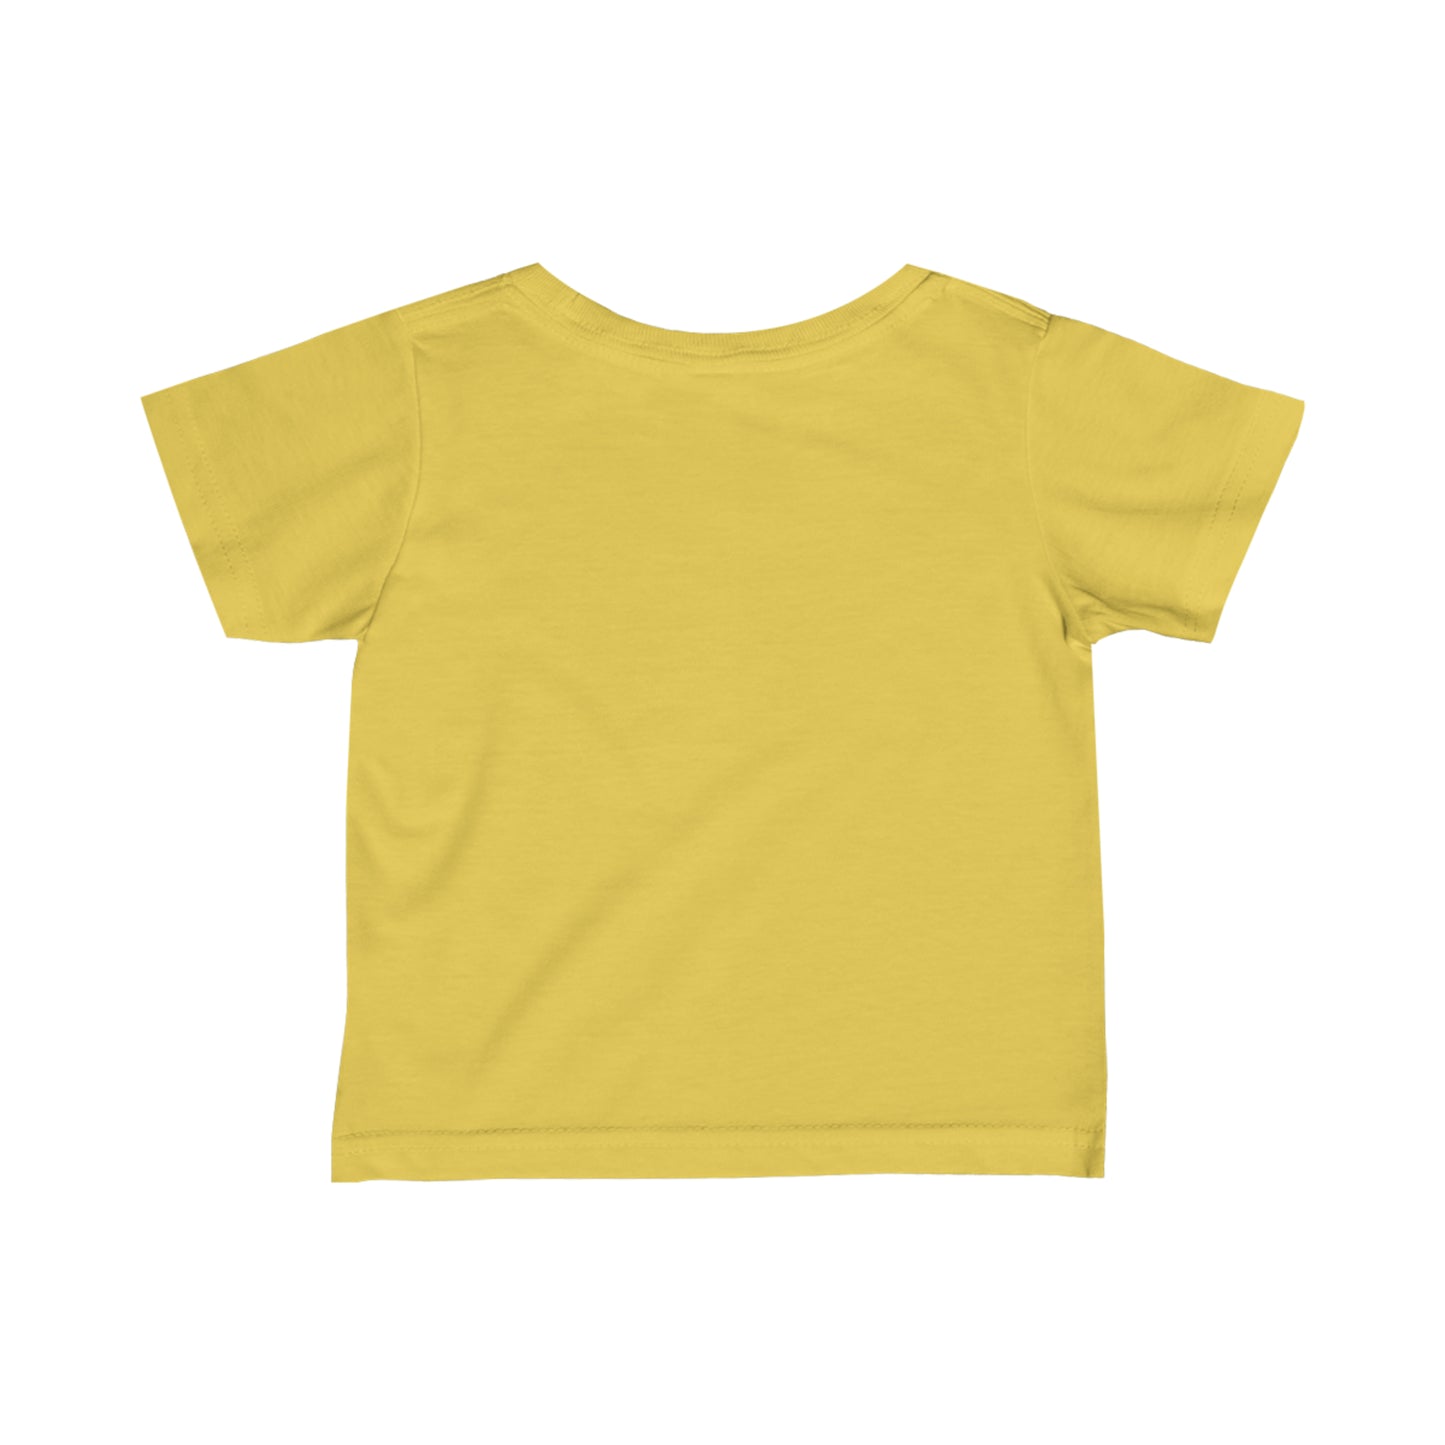 Iridescent Owl Infant Fine Jersey Tee, Sizes 6 Months - 24 Months